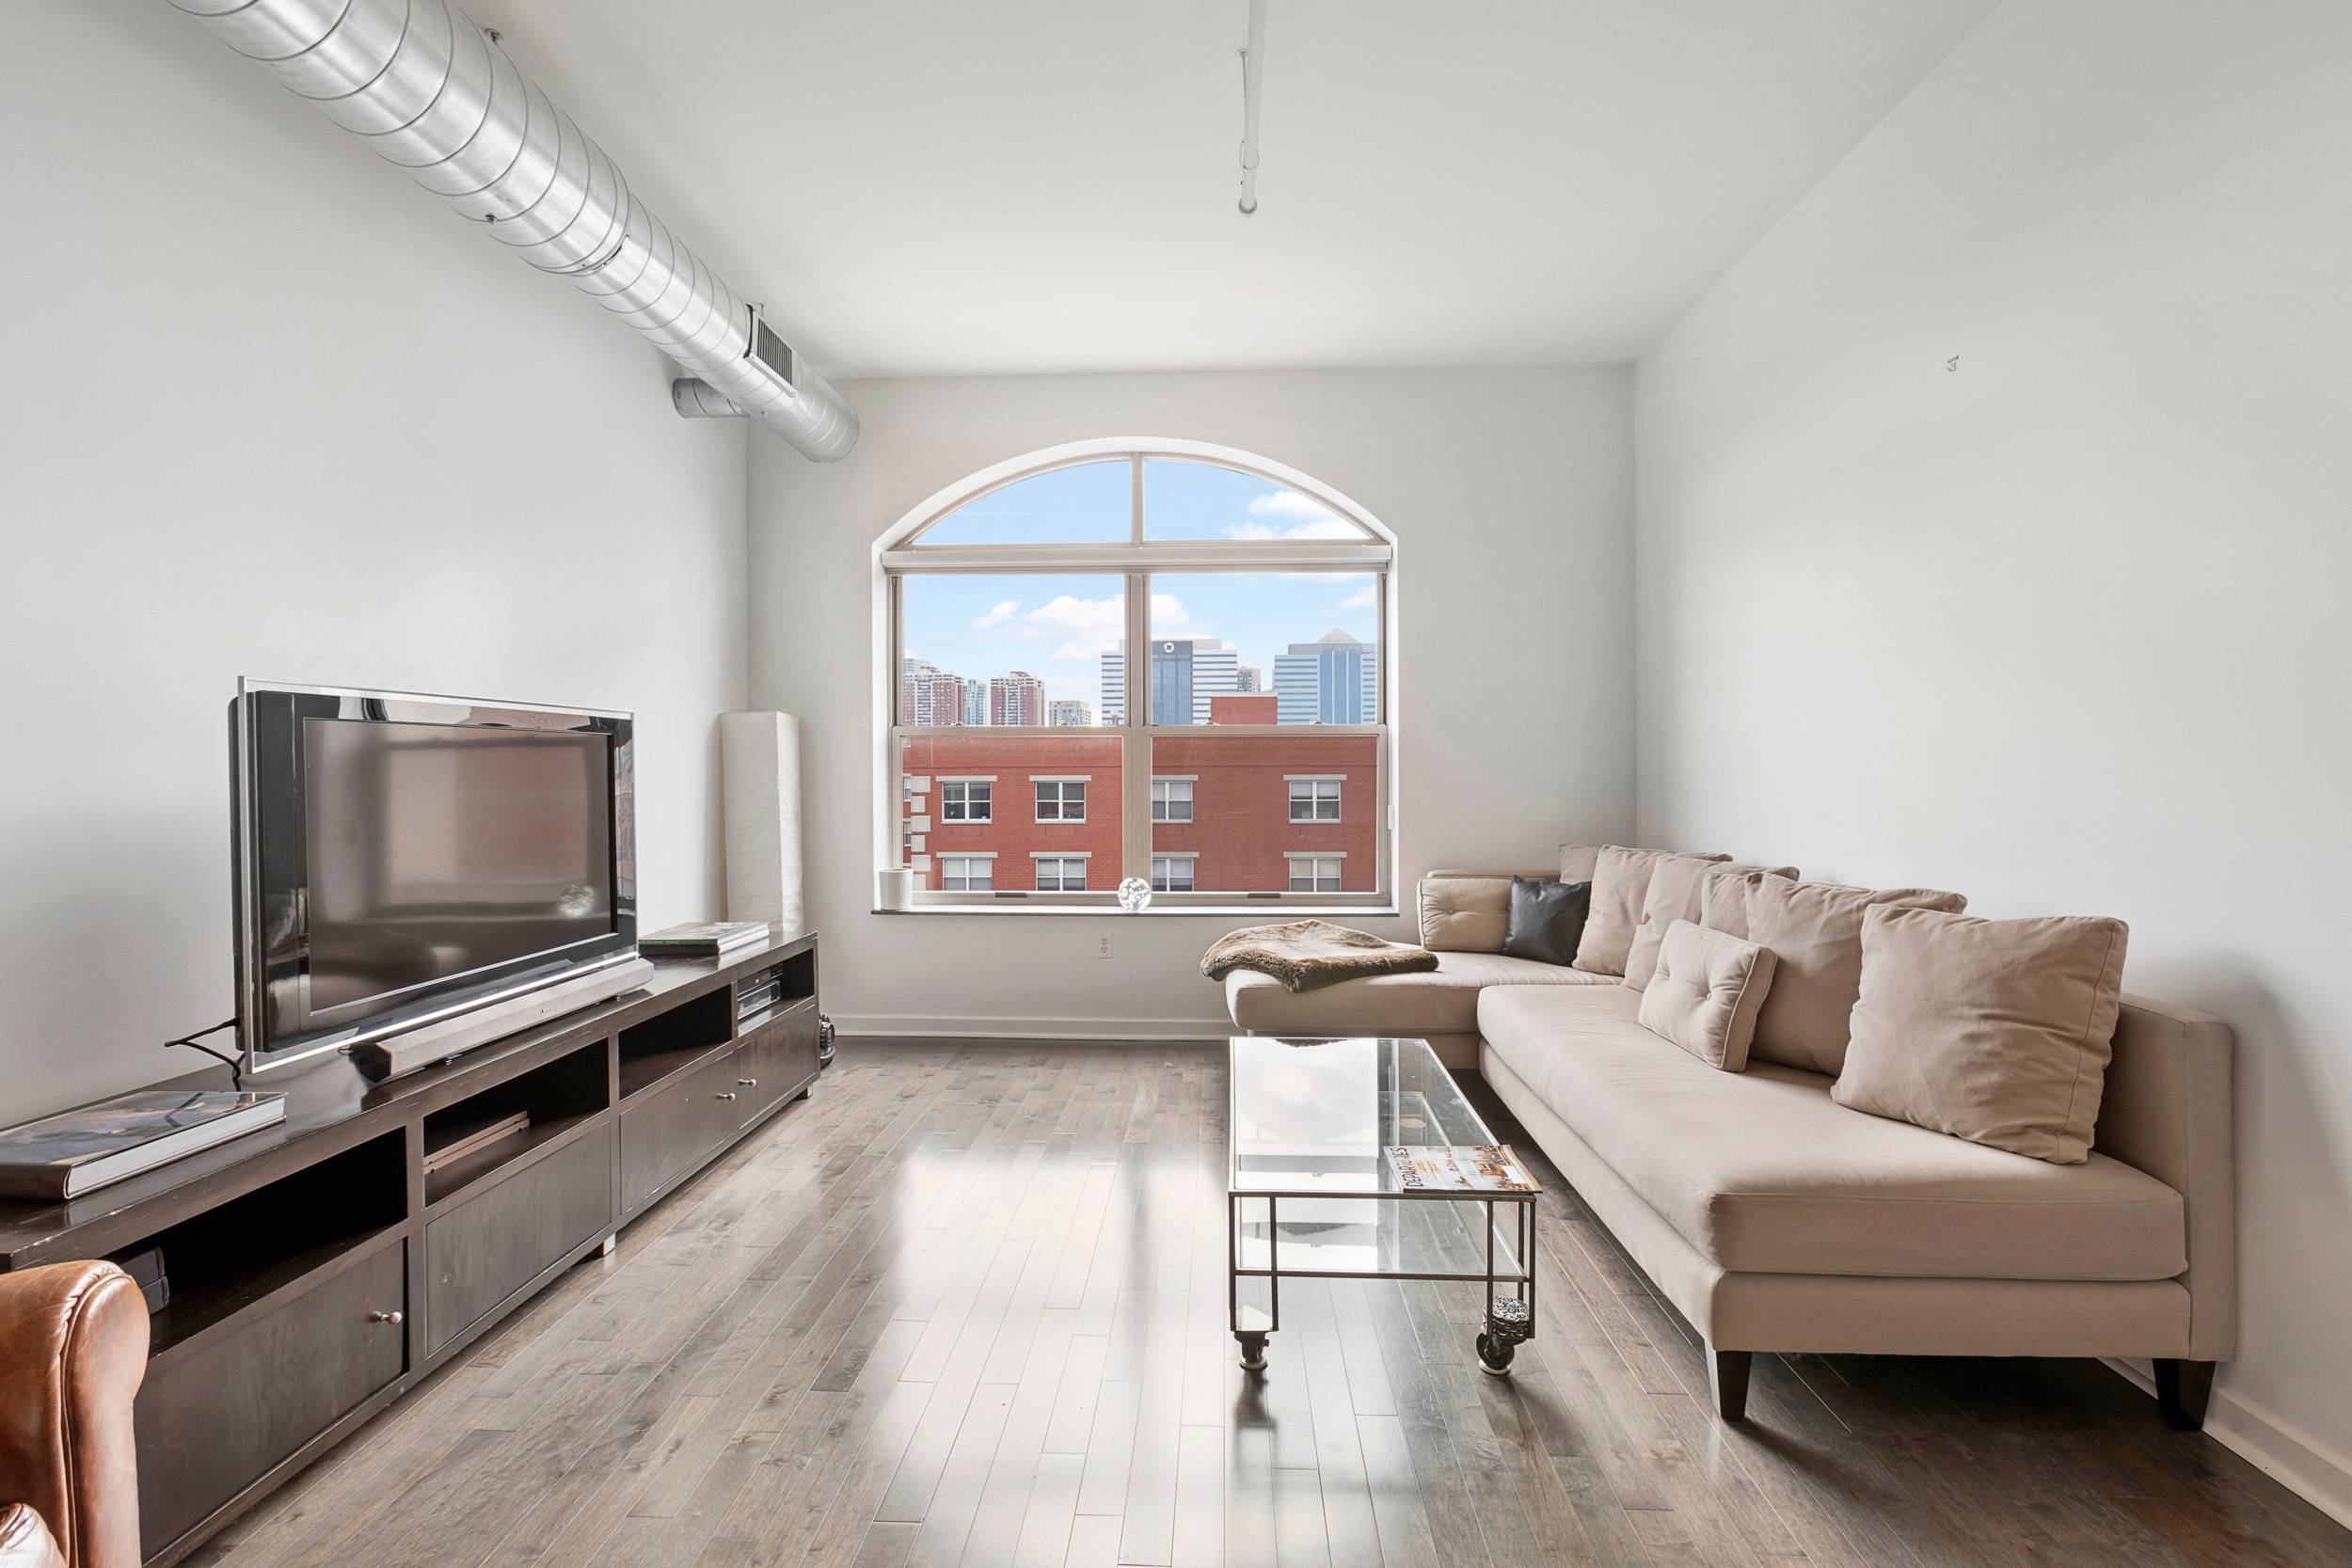 NO FEE!Immaculate 1 bed/1bath Loft Rental in Downtown Jersey City